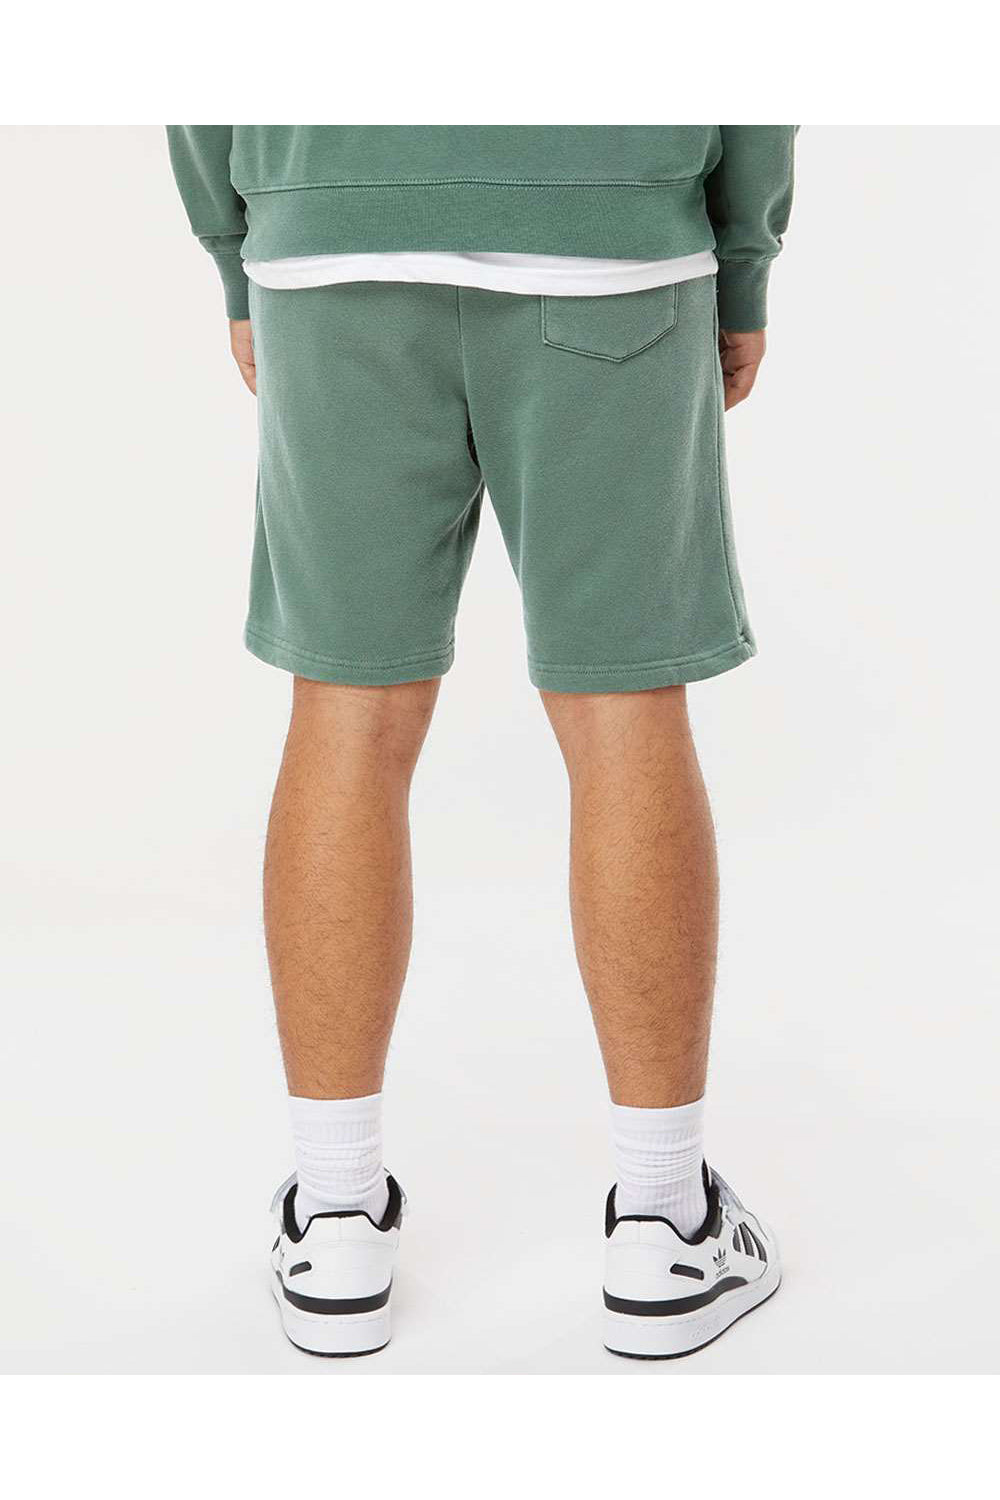 Independent Trading Co. PRM50STPD Mens Pigment Dyed Fleece Shorts w/ Pockets Alpine Green Model Back